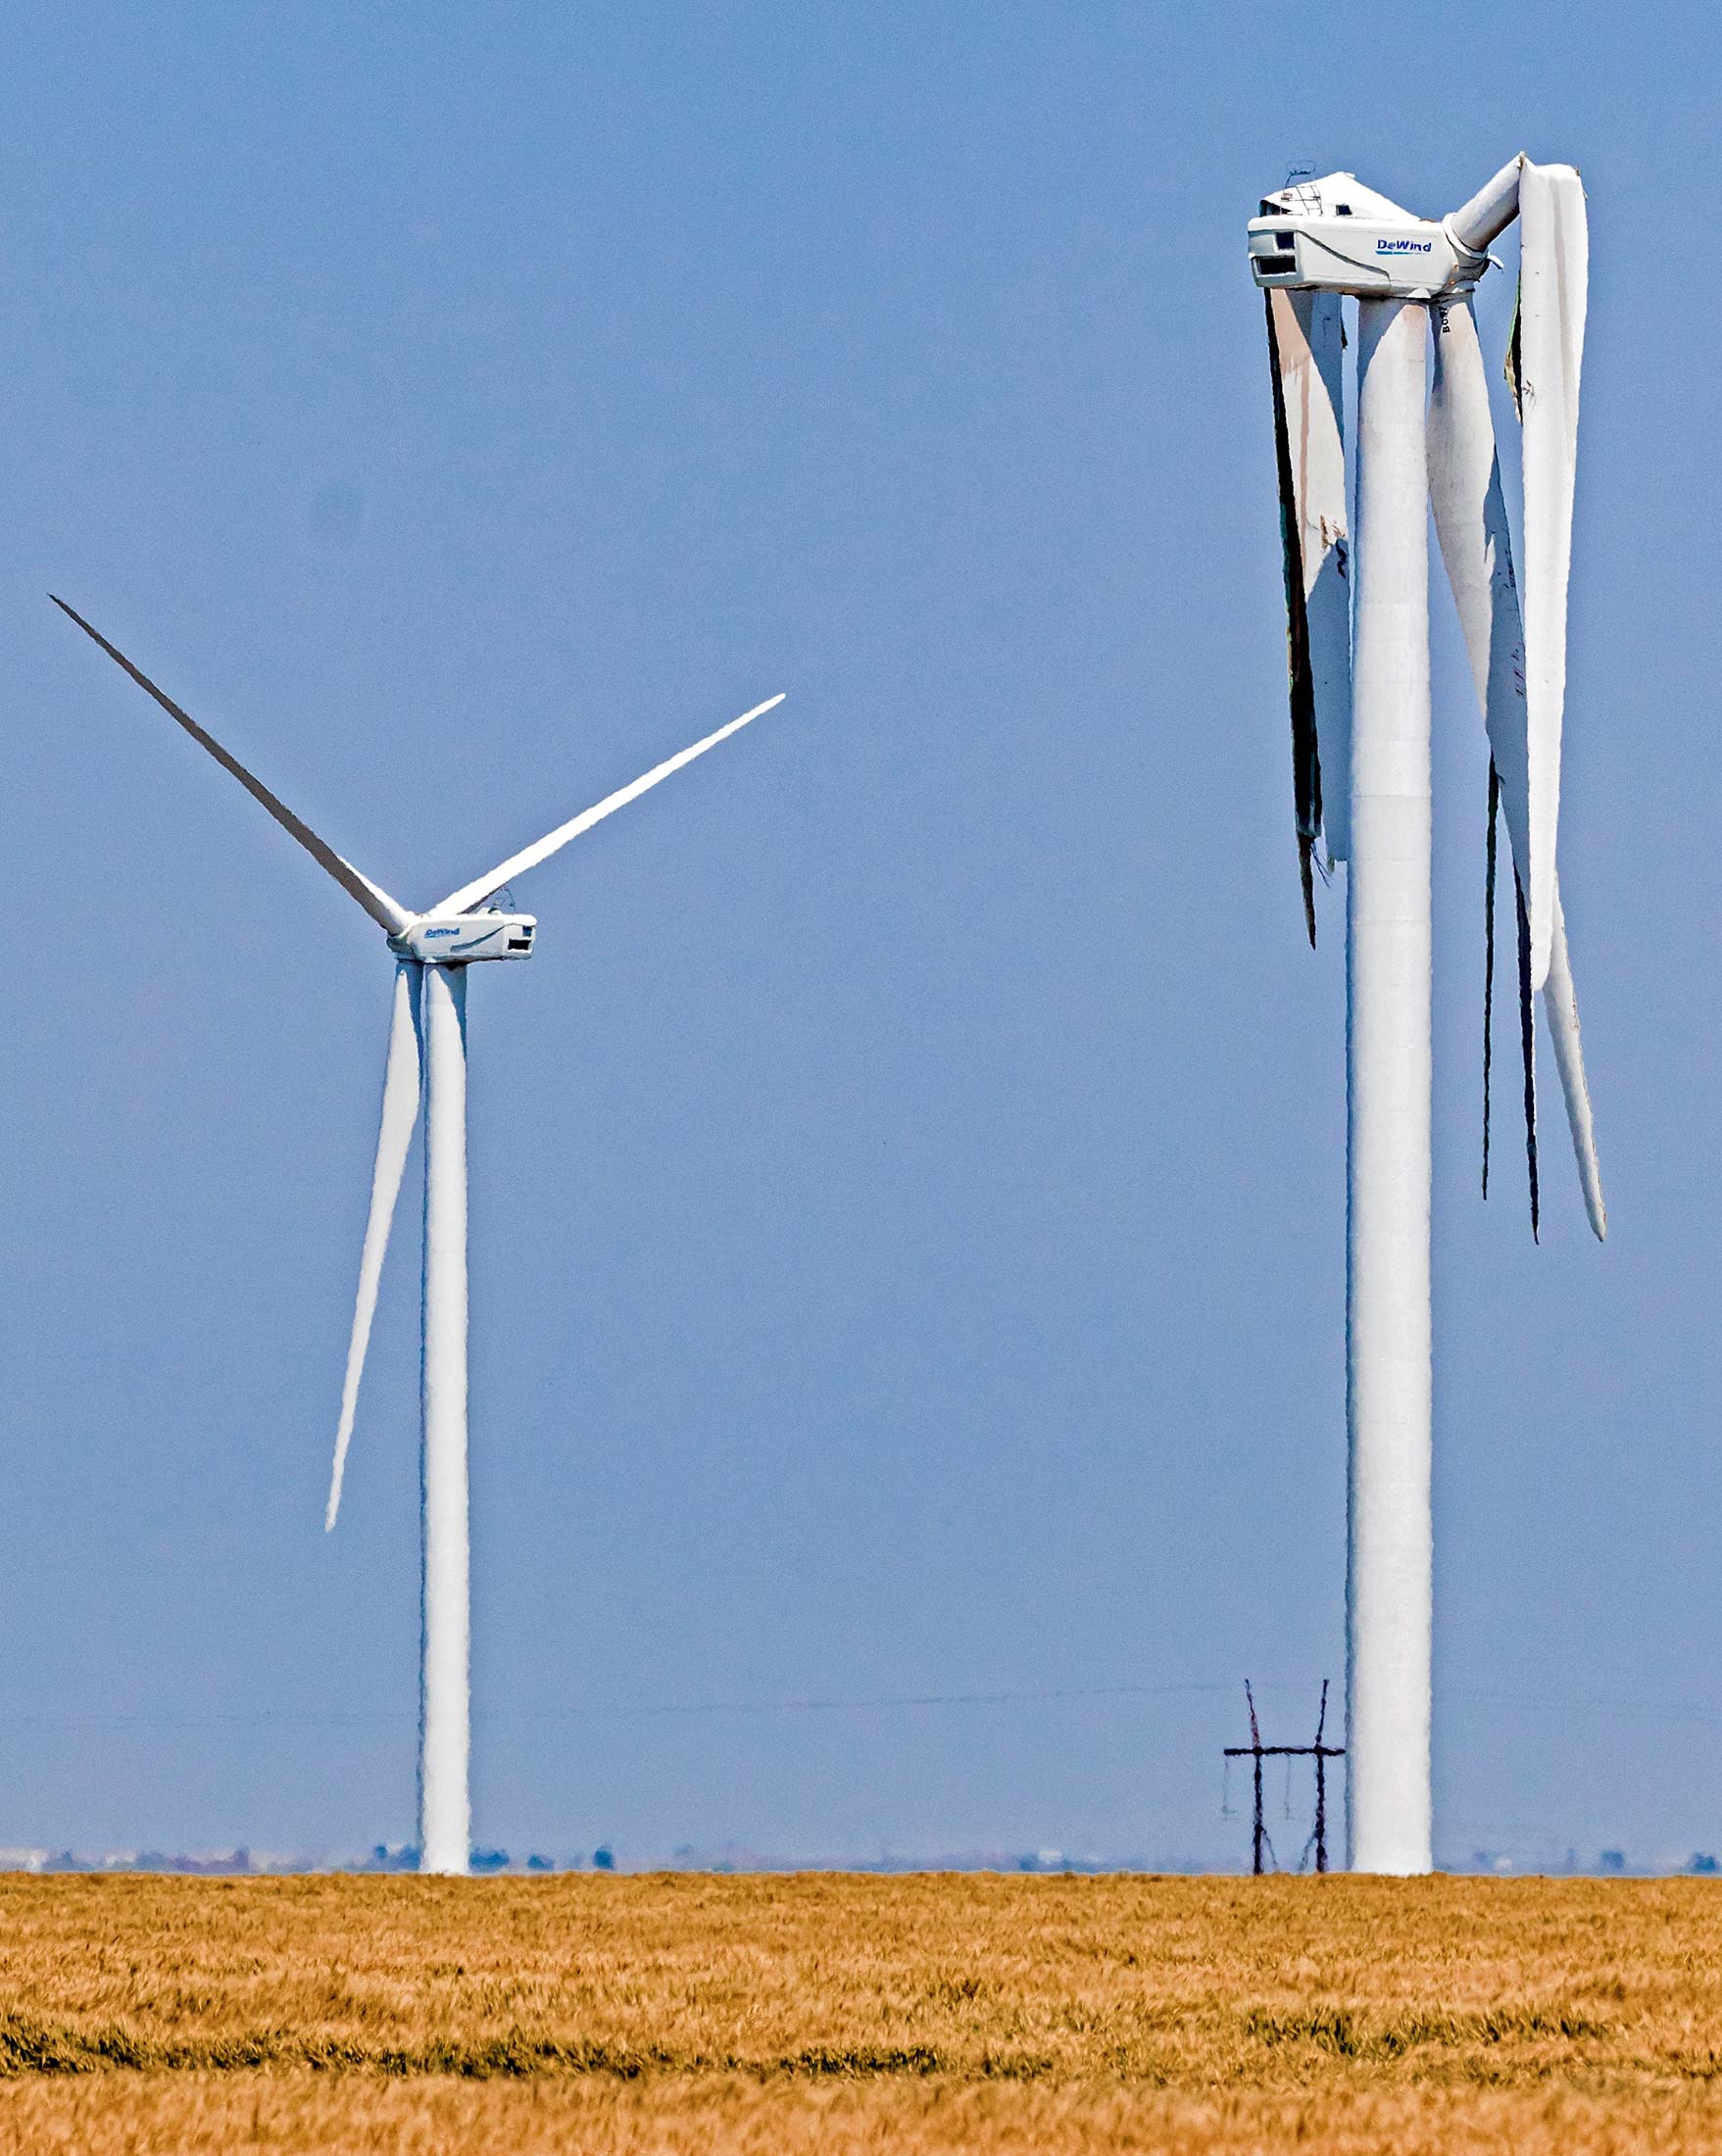 Wind power industry faces size problem as blades get longer than